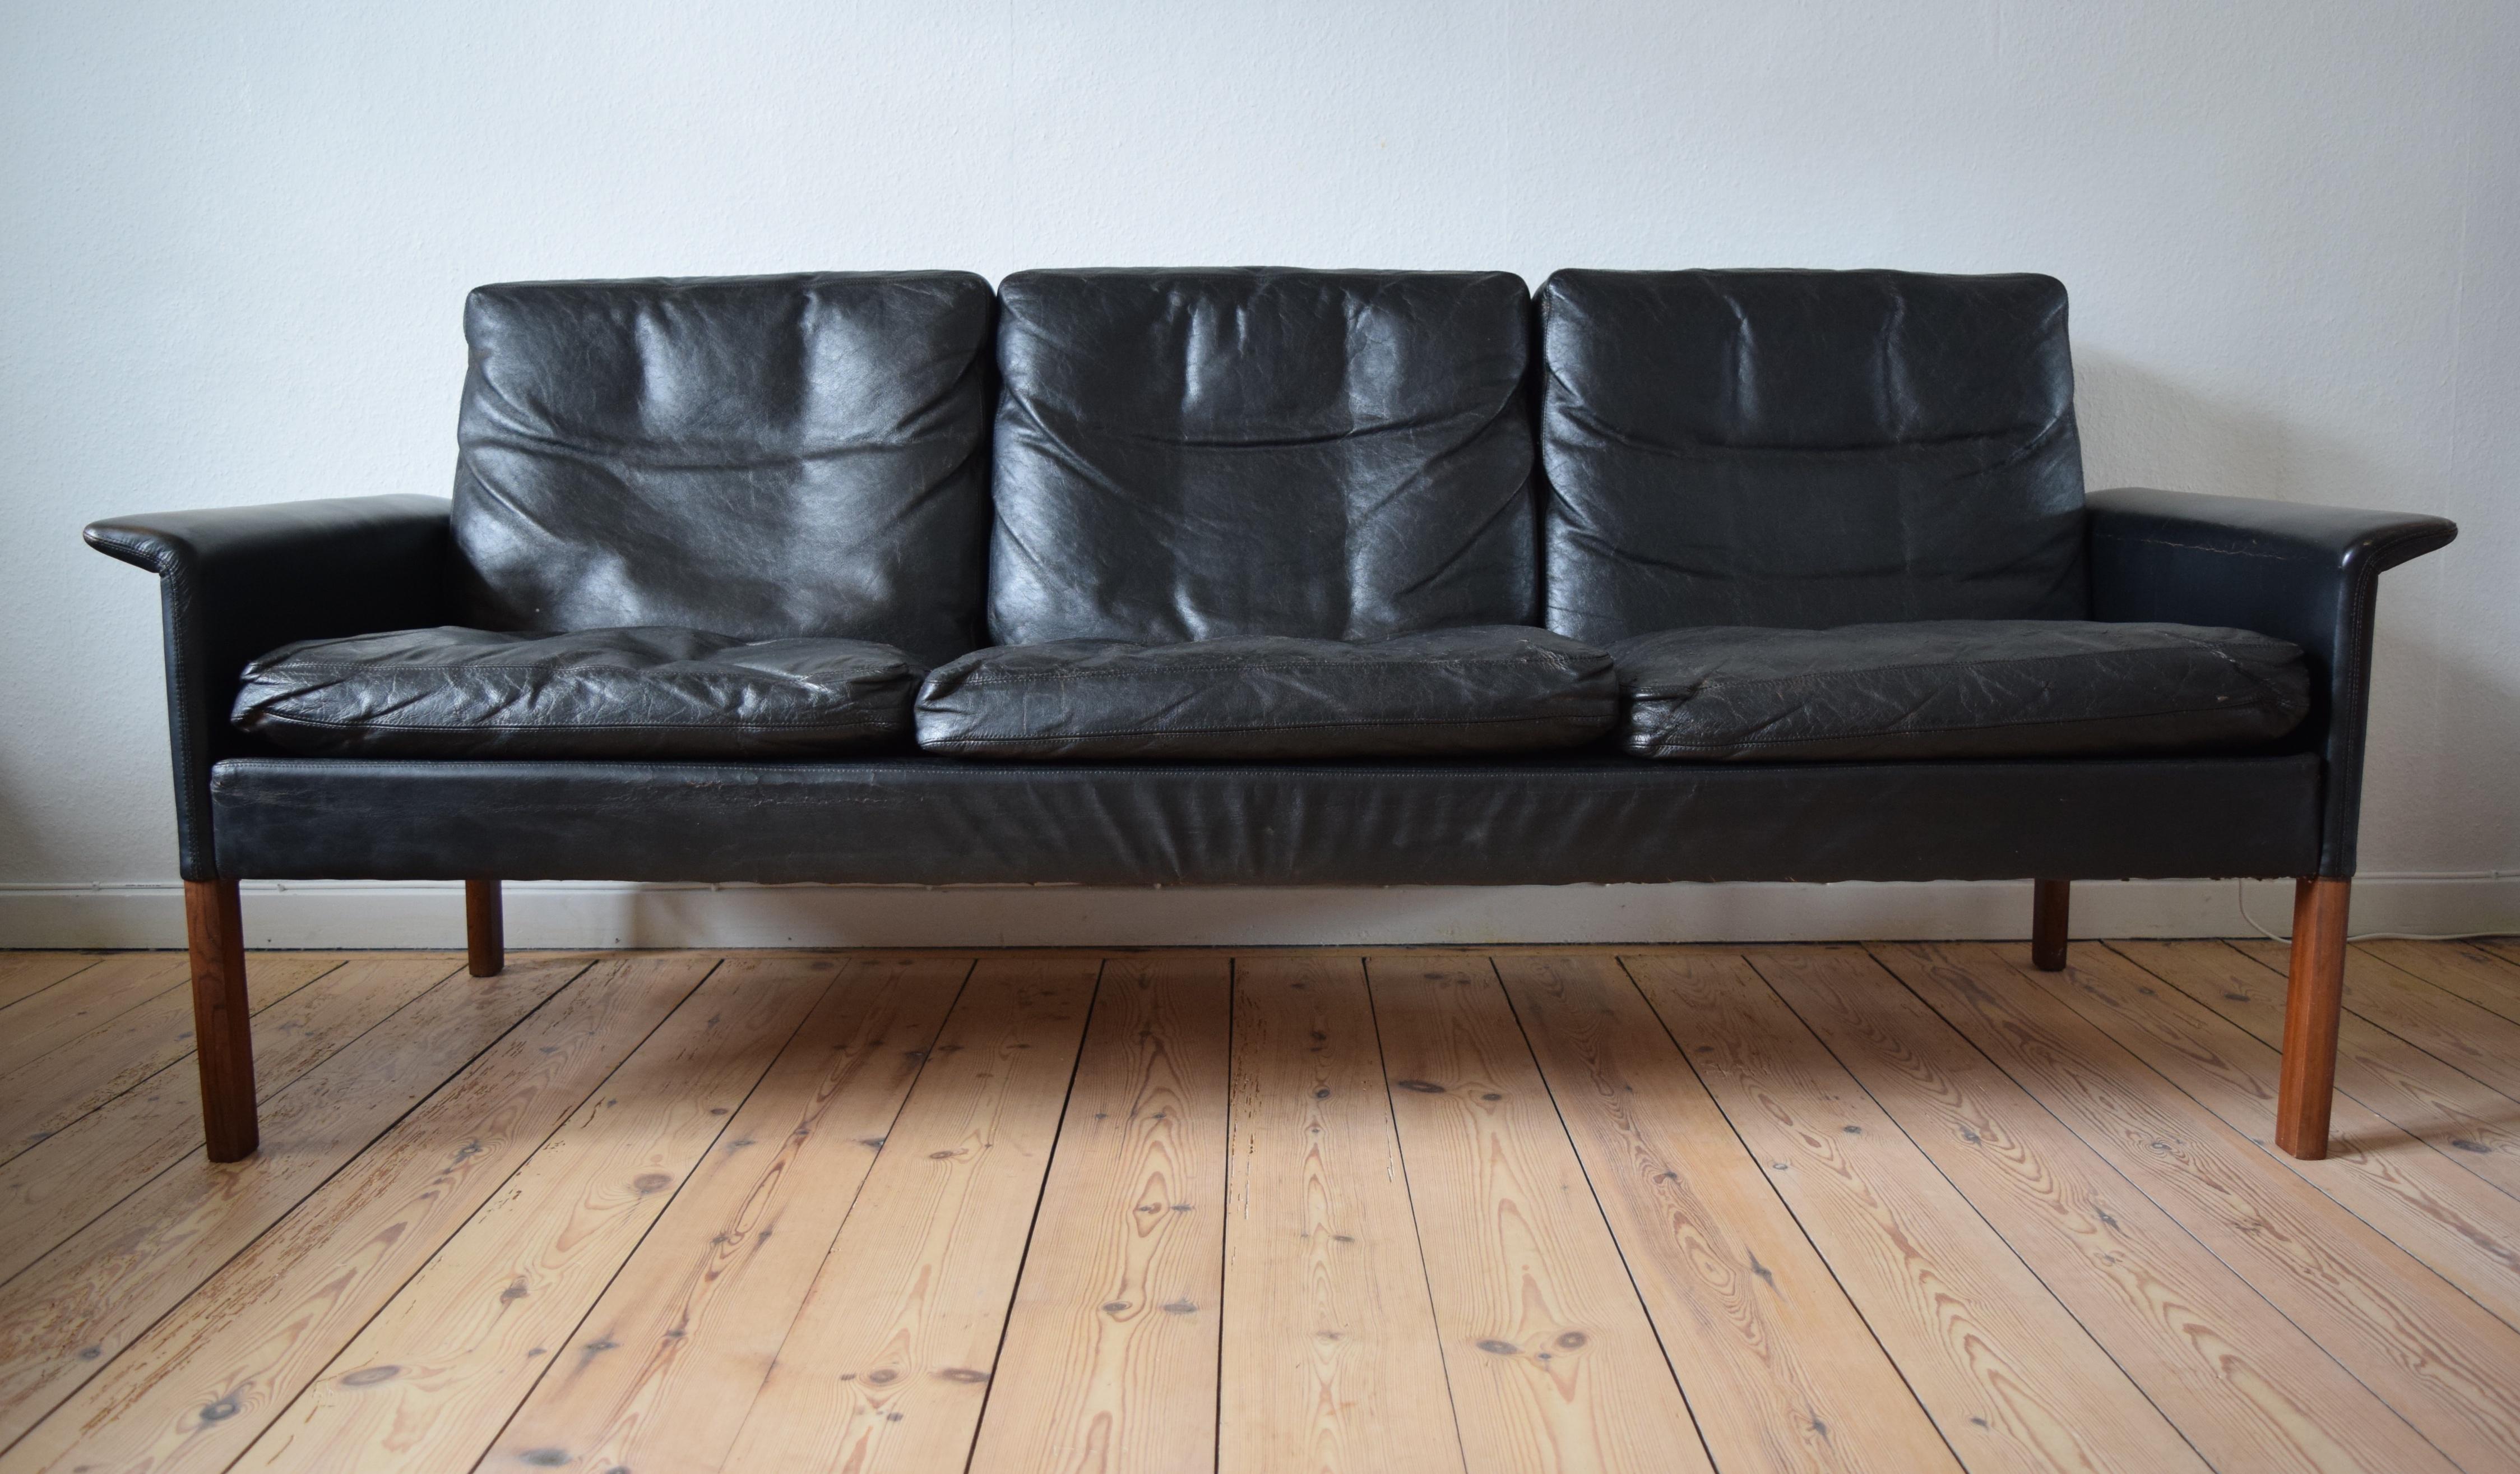 The model 500 sofa by Hans Olsen is one of his most iconic designs. The flipper armrests and narrow sides give this piece it's distinctive sleek appearance. Manufactured by CS Møbler in the 1960s these sofas still look great today. On the front a